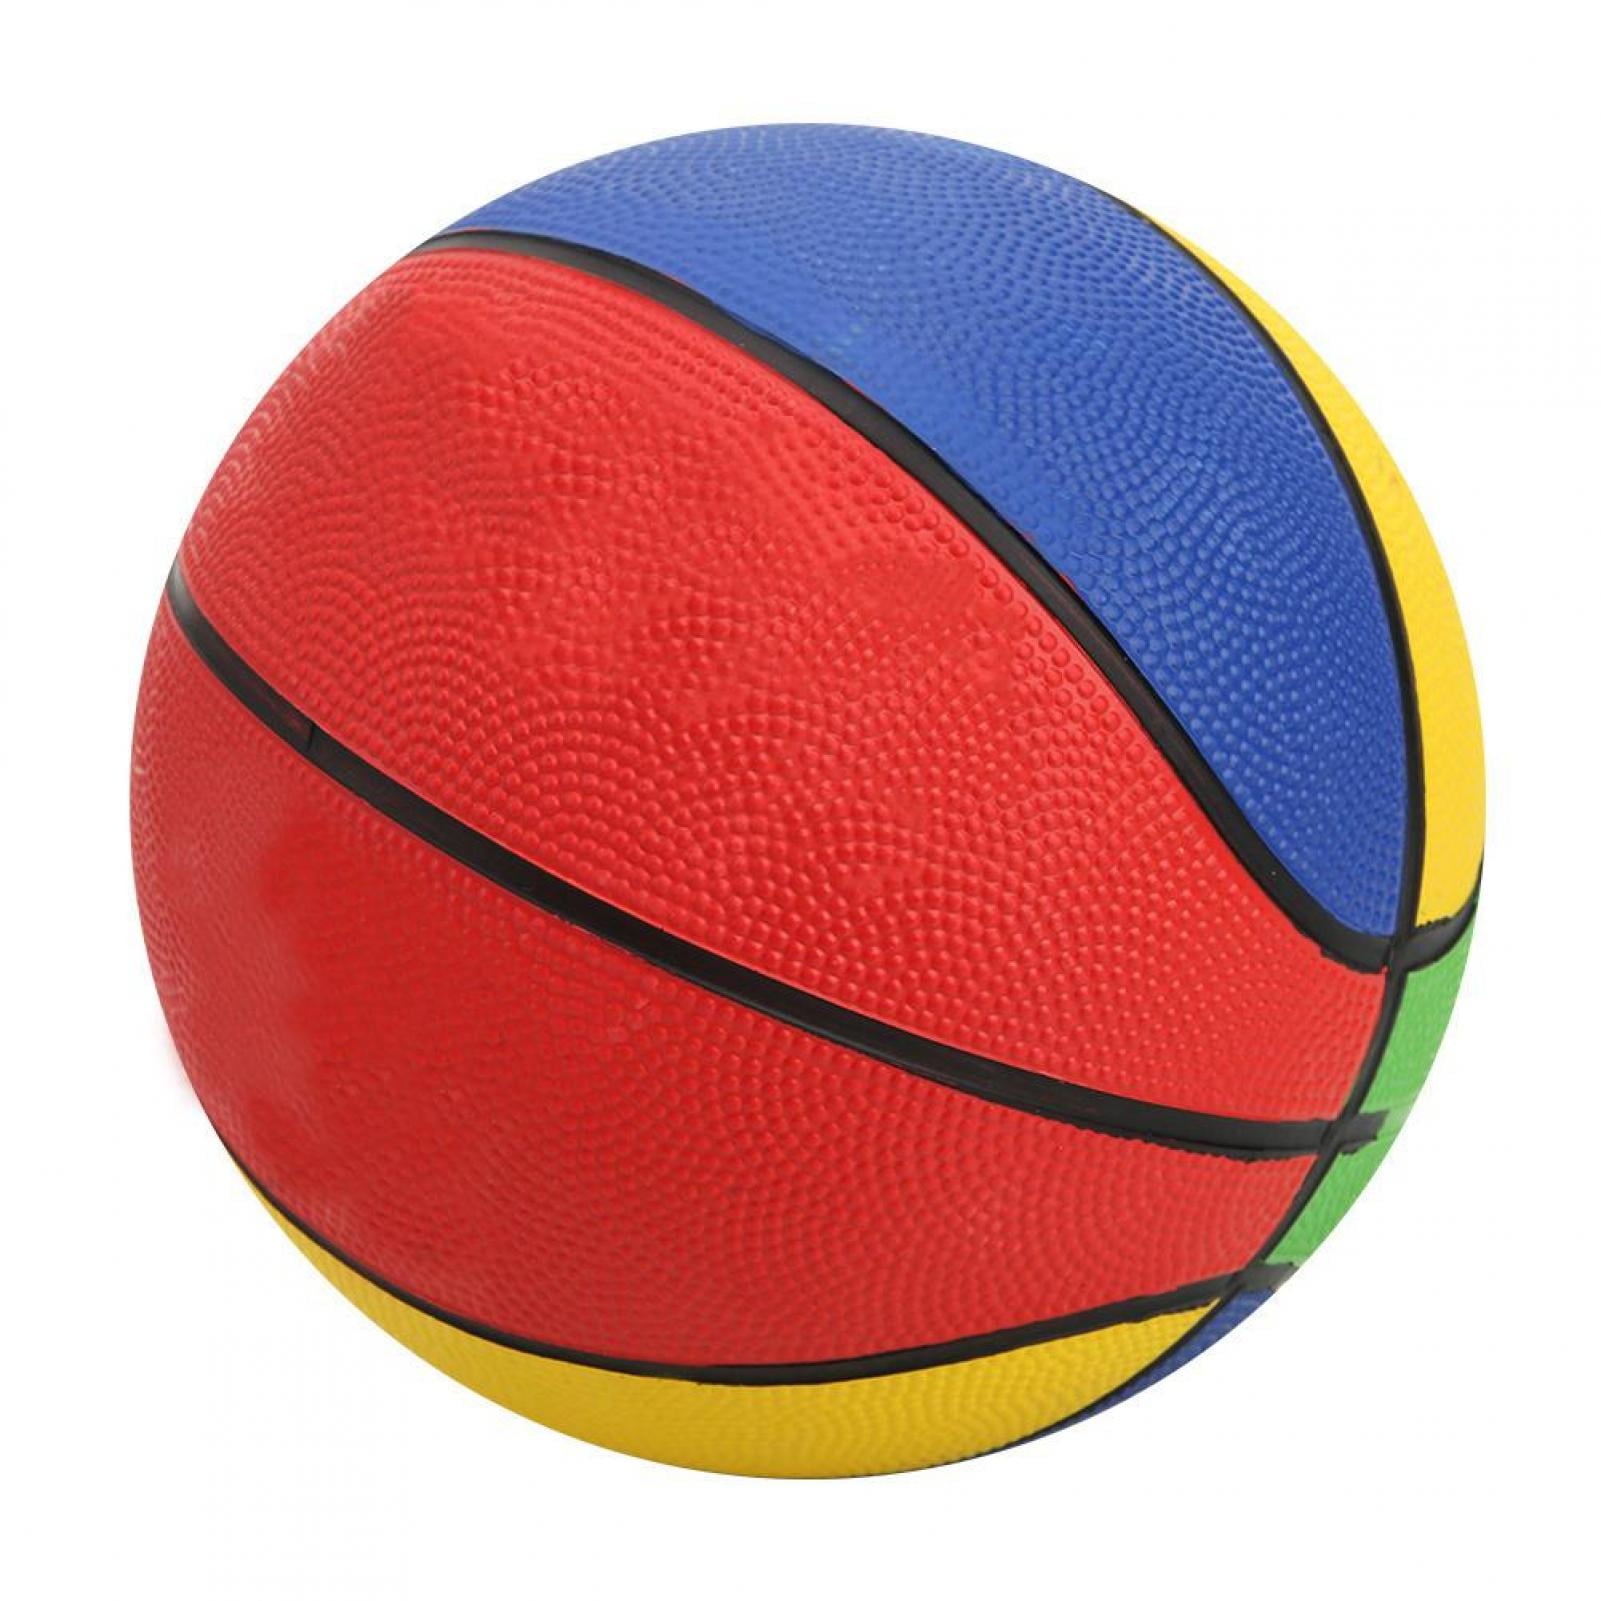 April Gift Mini Basketball Kindergarten,Kindergarten Basketball Wear Resistant Mini Basketball Good Elasticity Soft and Smooth Sport Toy Gift for Indoor and Outdoor 1-5 Years Old 